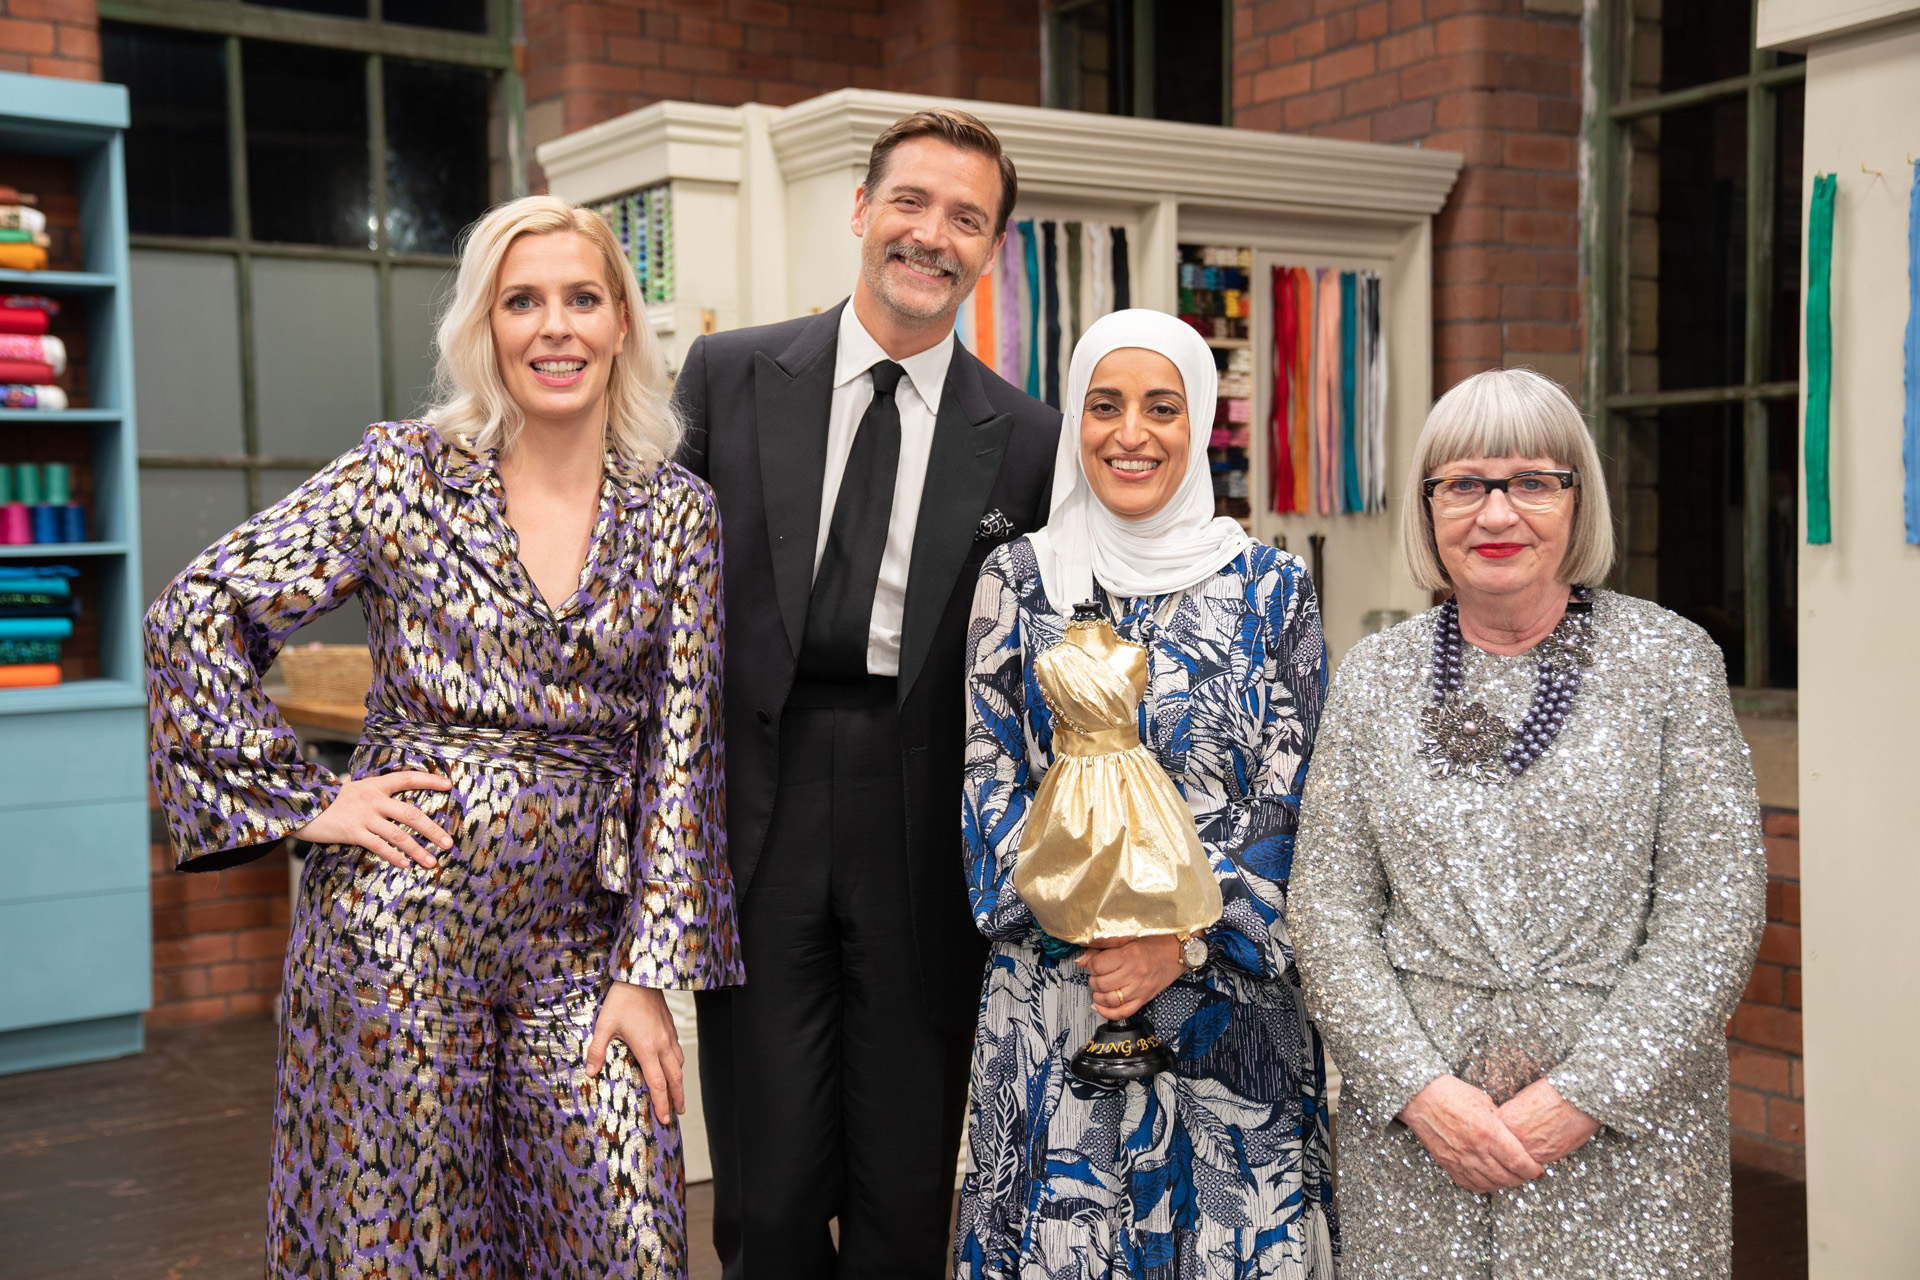 Presenter Sara Pascoe, Judges Patrick Grant and Esme Young with sewer Asmaa, with sewer Asmaa, Winner of The Great British Sewing Bee S9